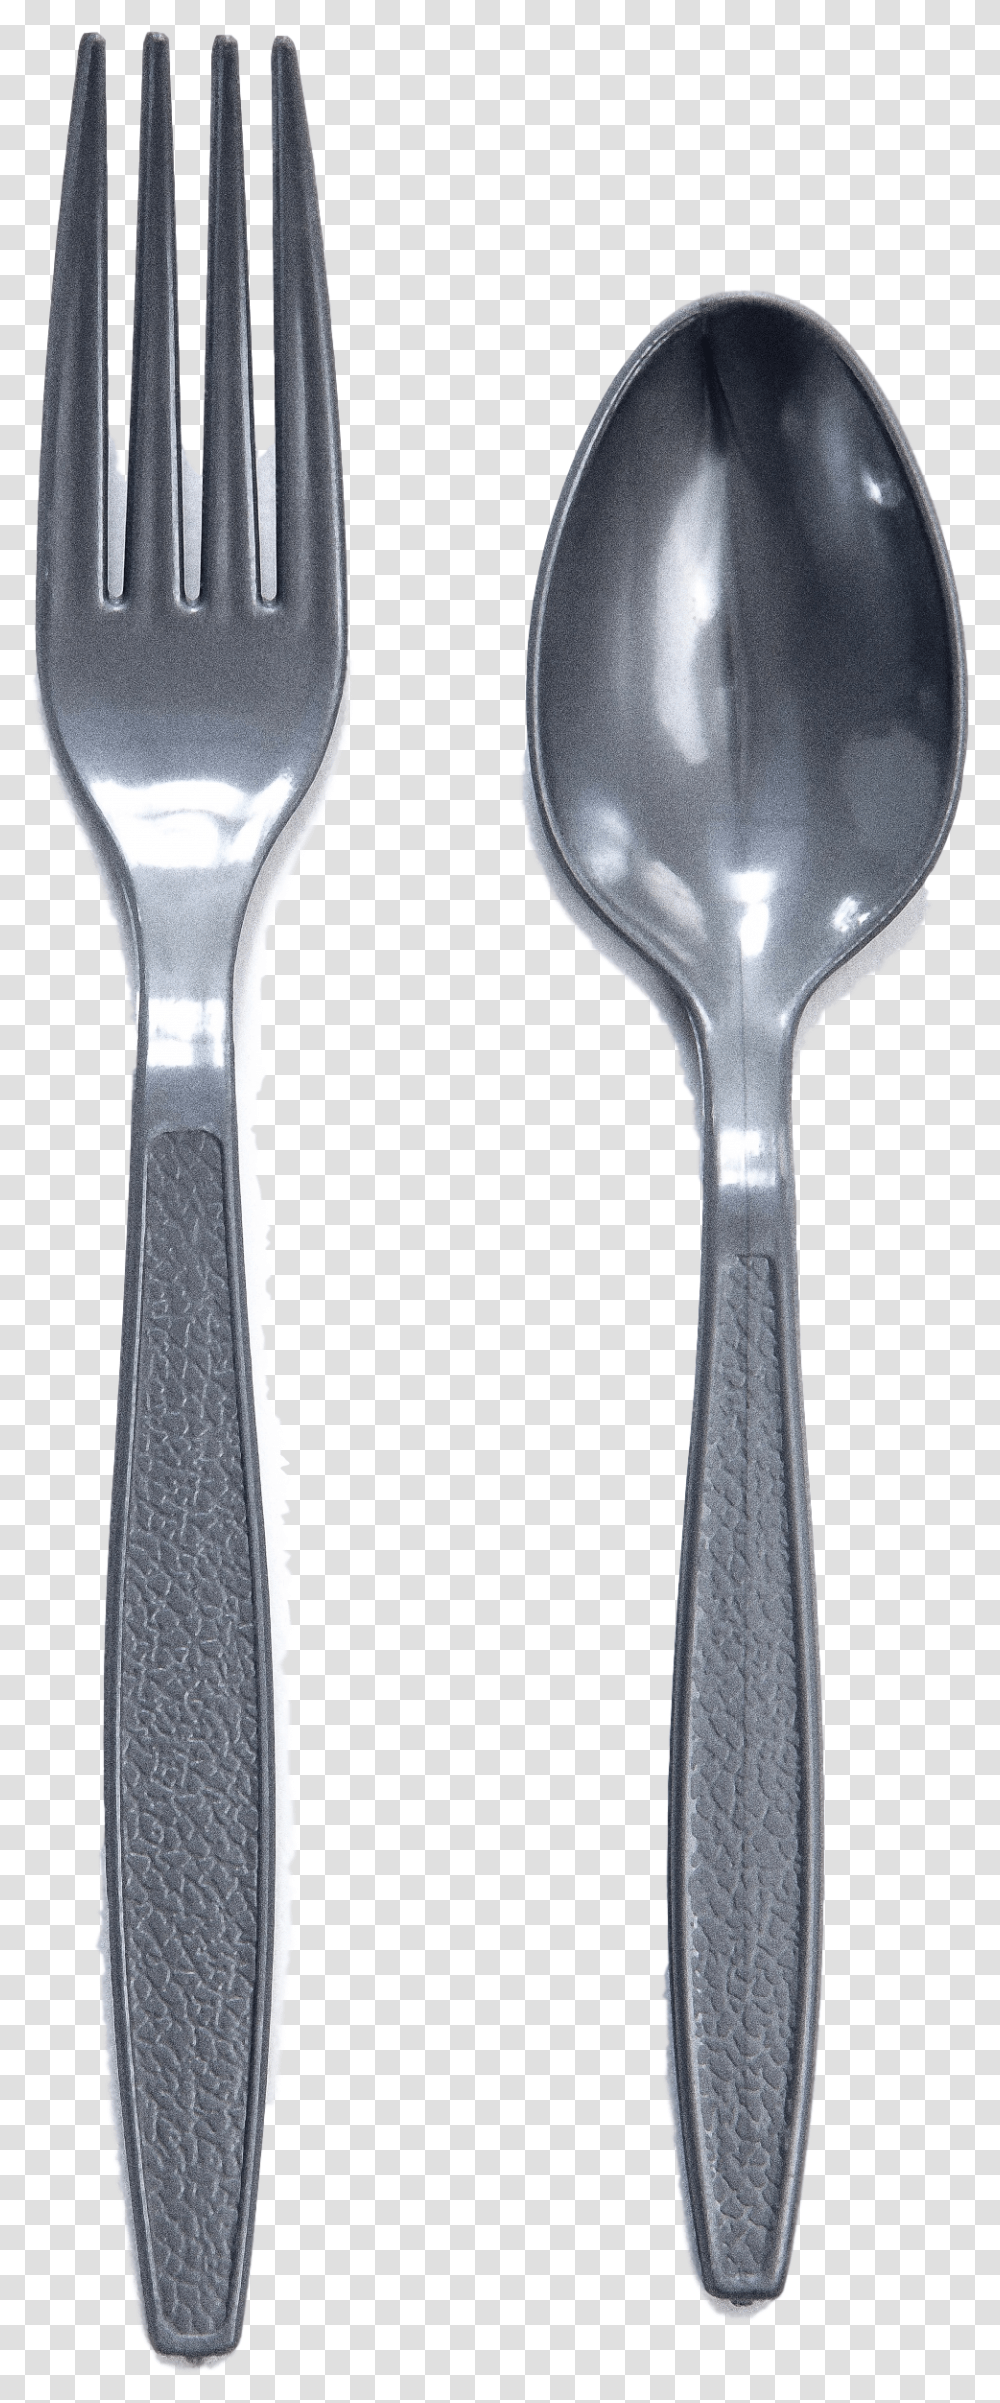 Knife, Spoon, Cutlery, Fork Transparent Png